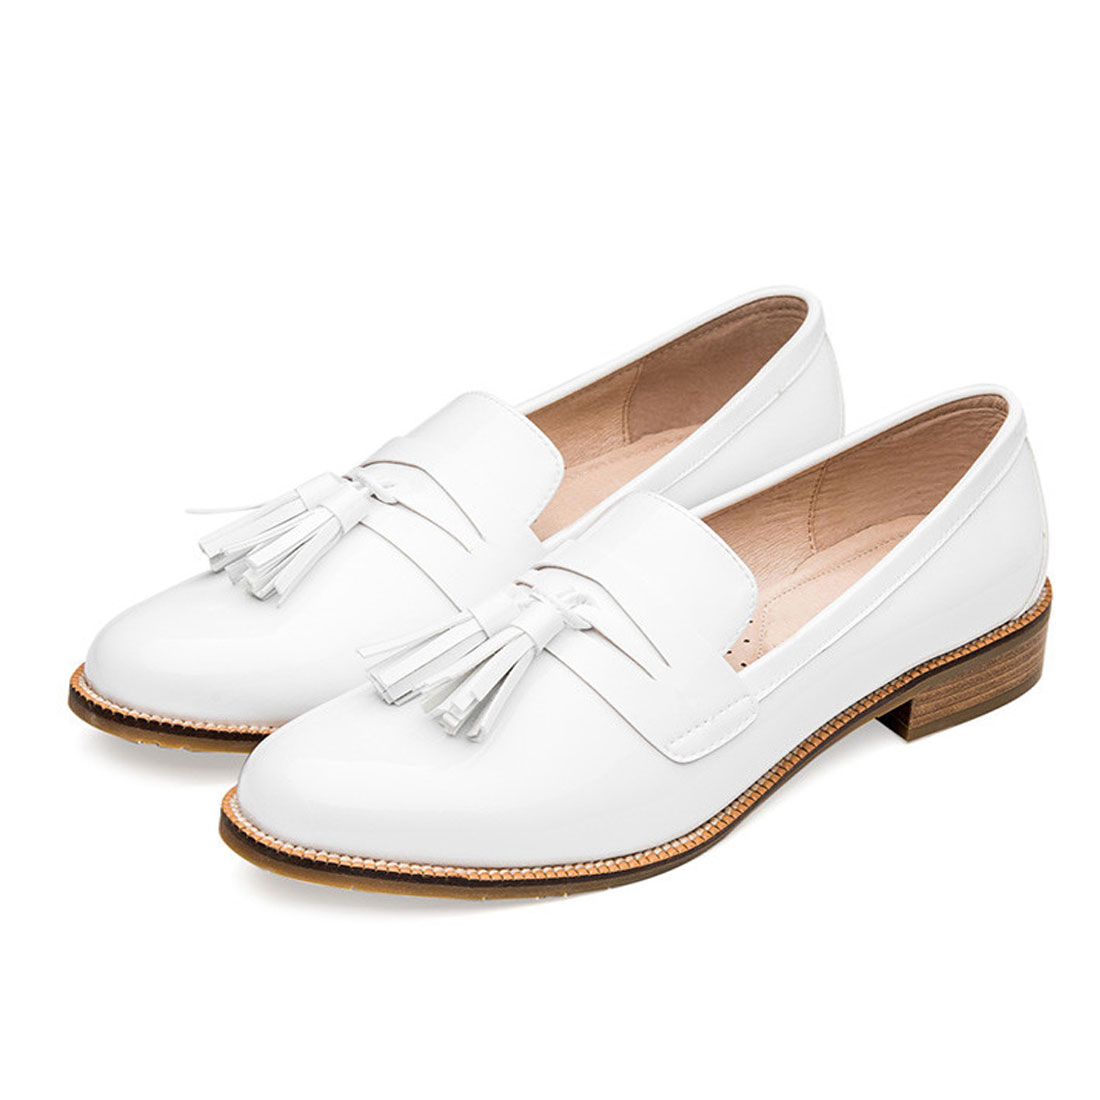 white casual flat women shoes China factory ladies flat shoes YH1223